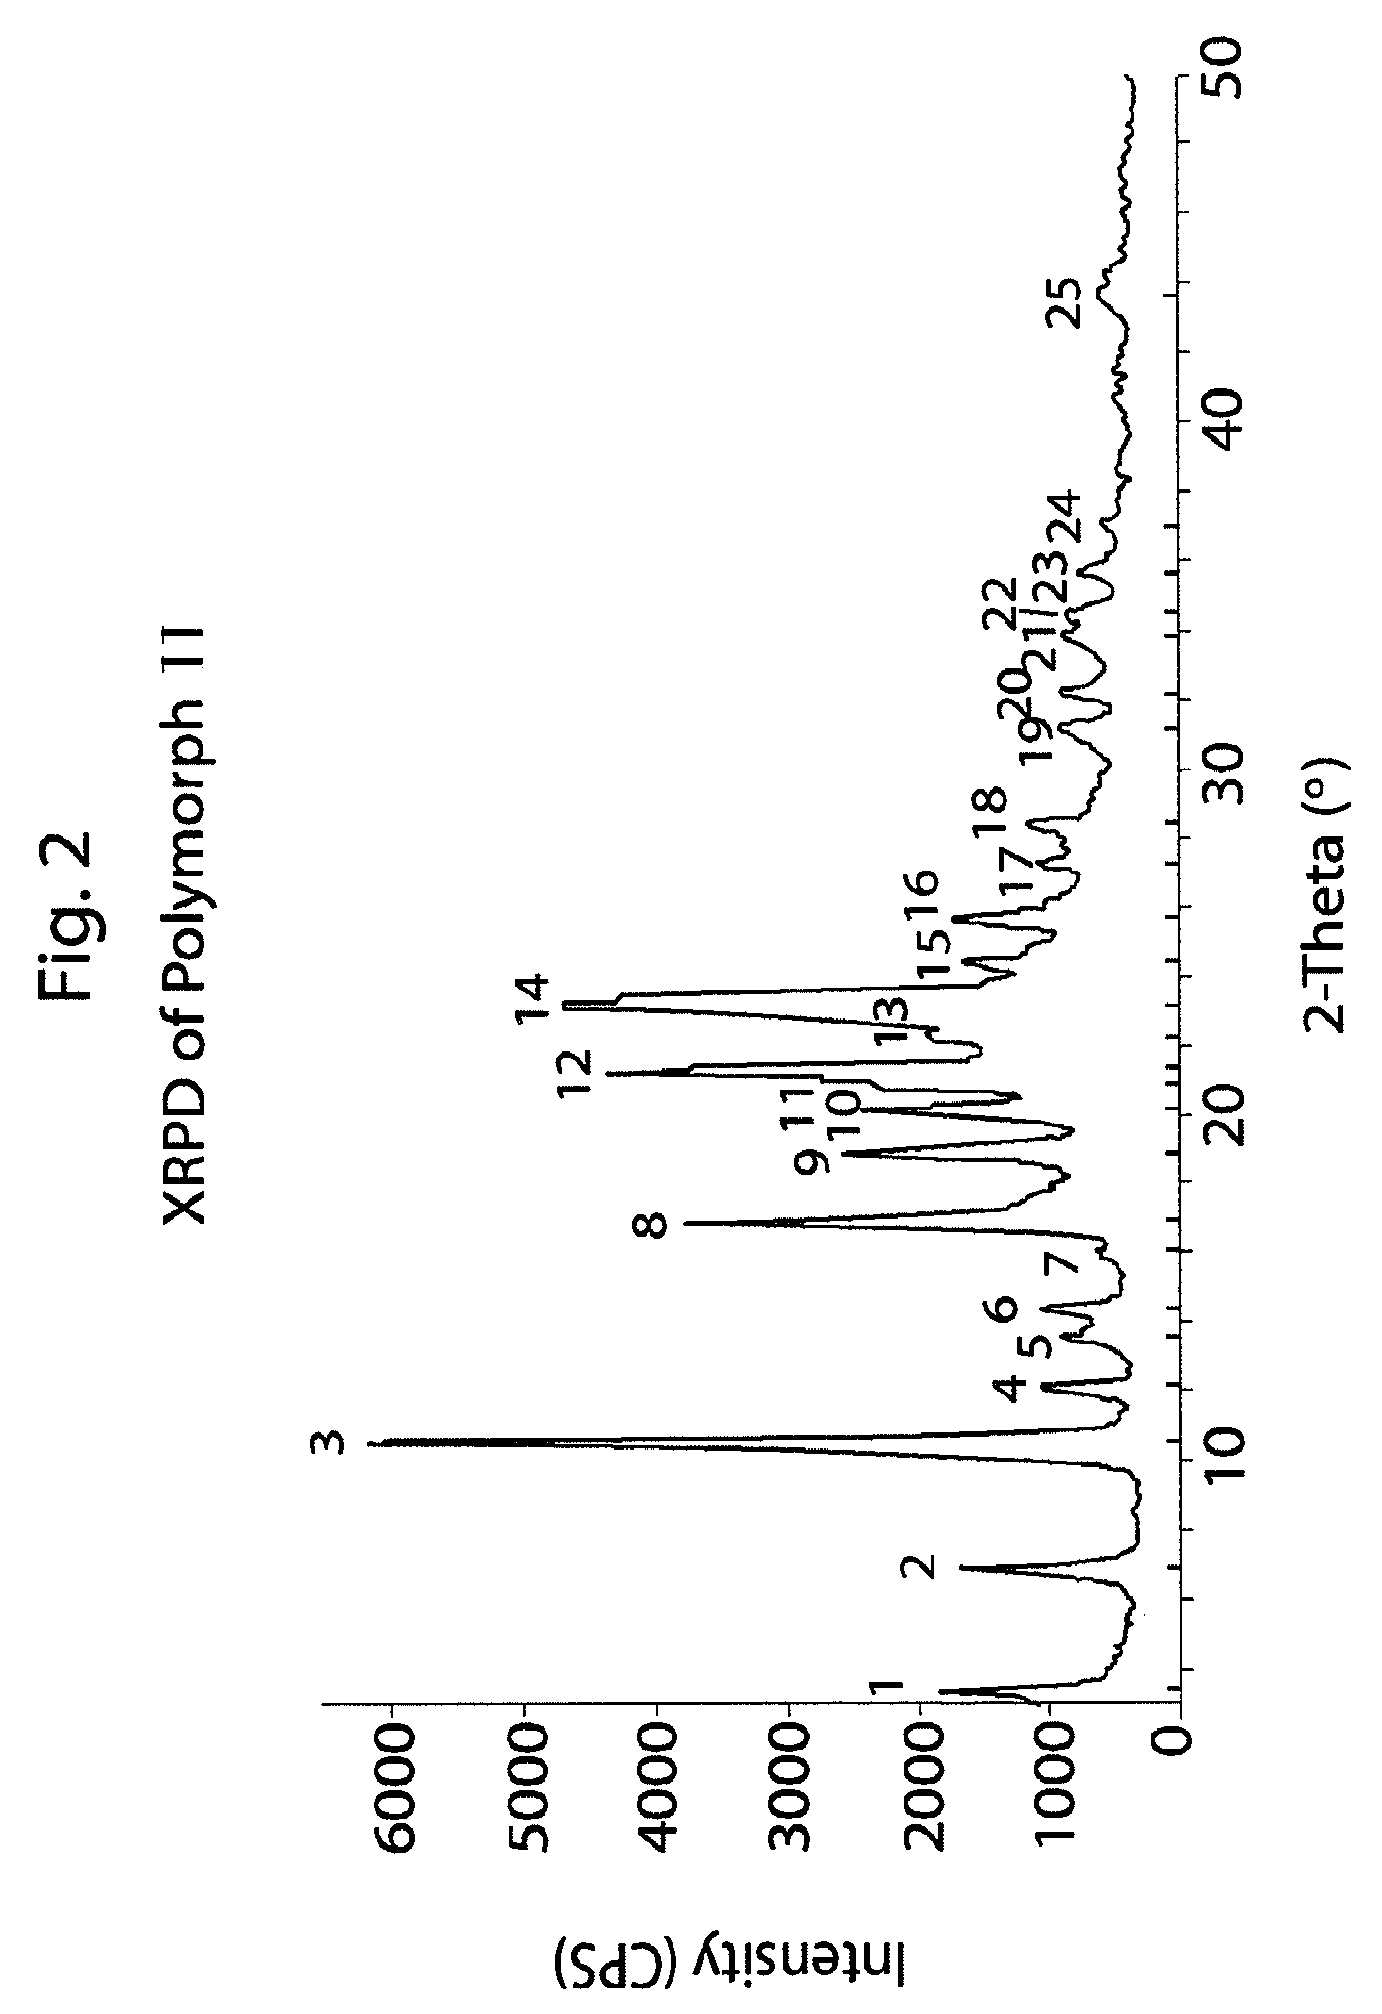 Method of preparation of antiviral compounds and useful intermediates thereof